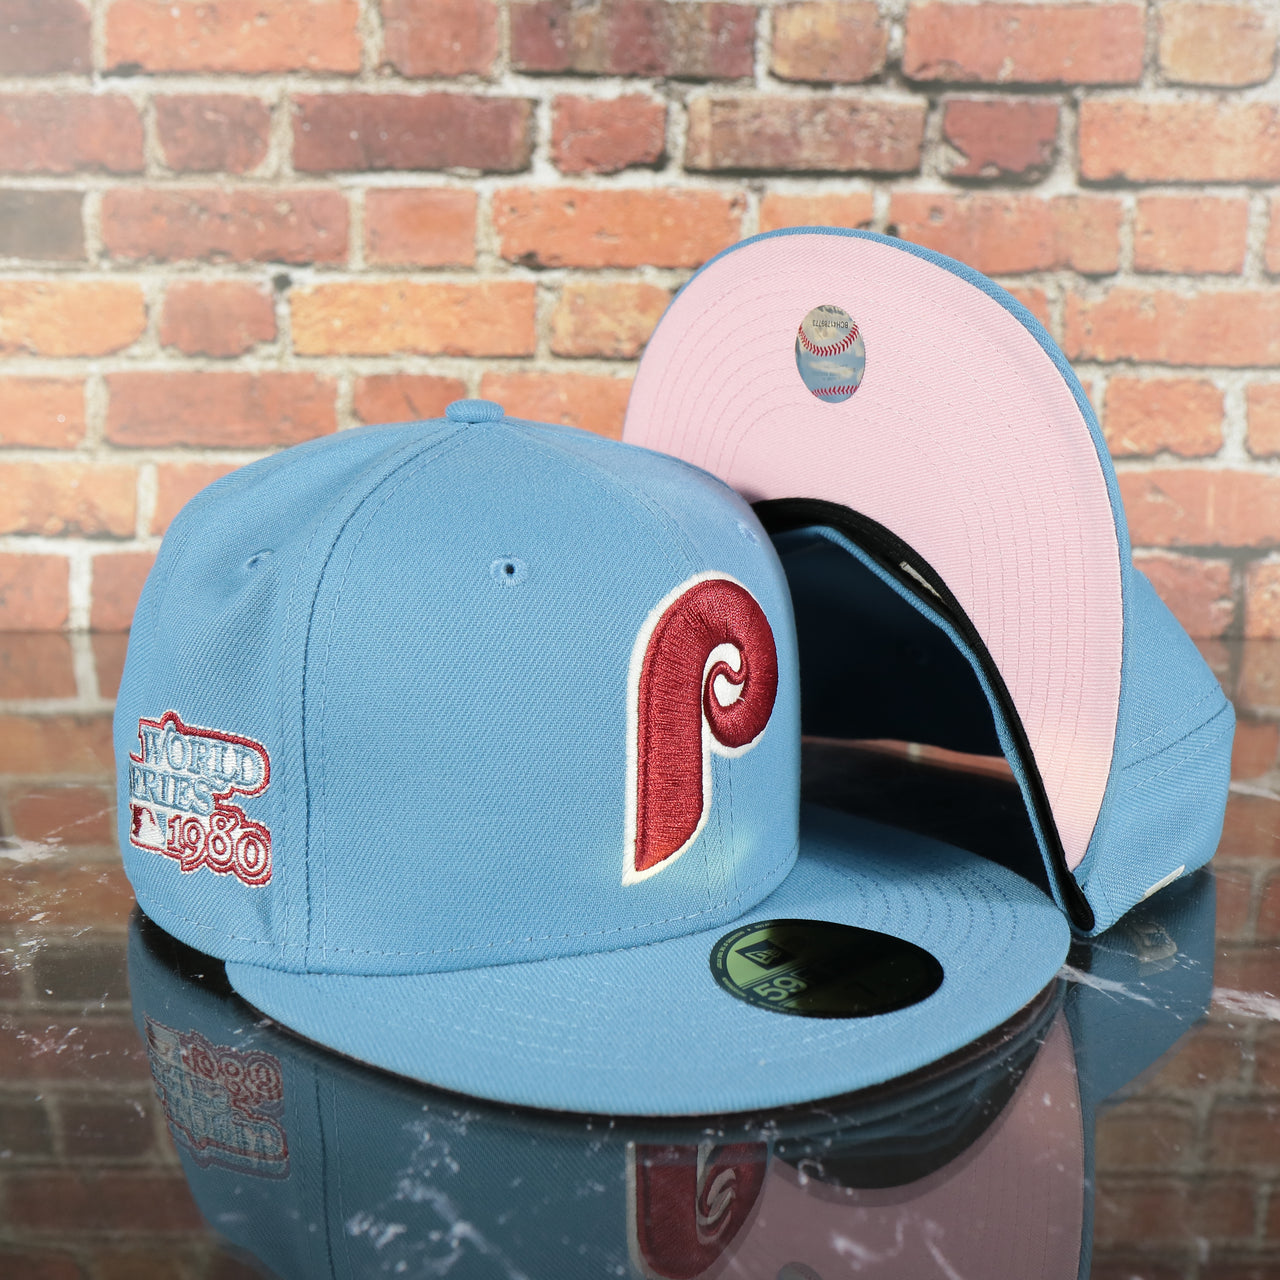 Philadelphia Phillies 1980 World Series Glow In The Dark Pink Brim 59fifty Fitted Cap | Sky Blue